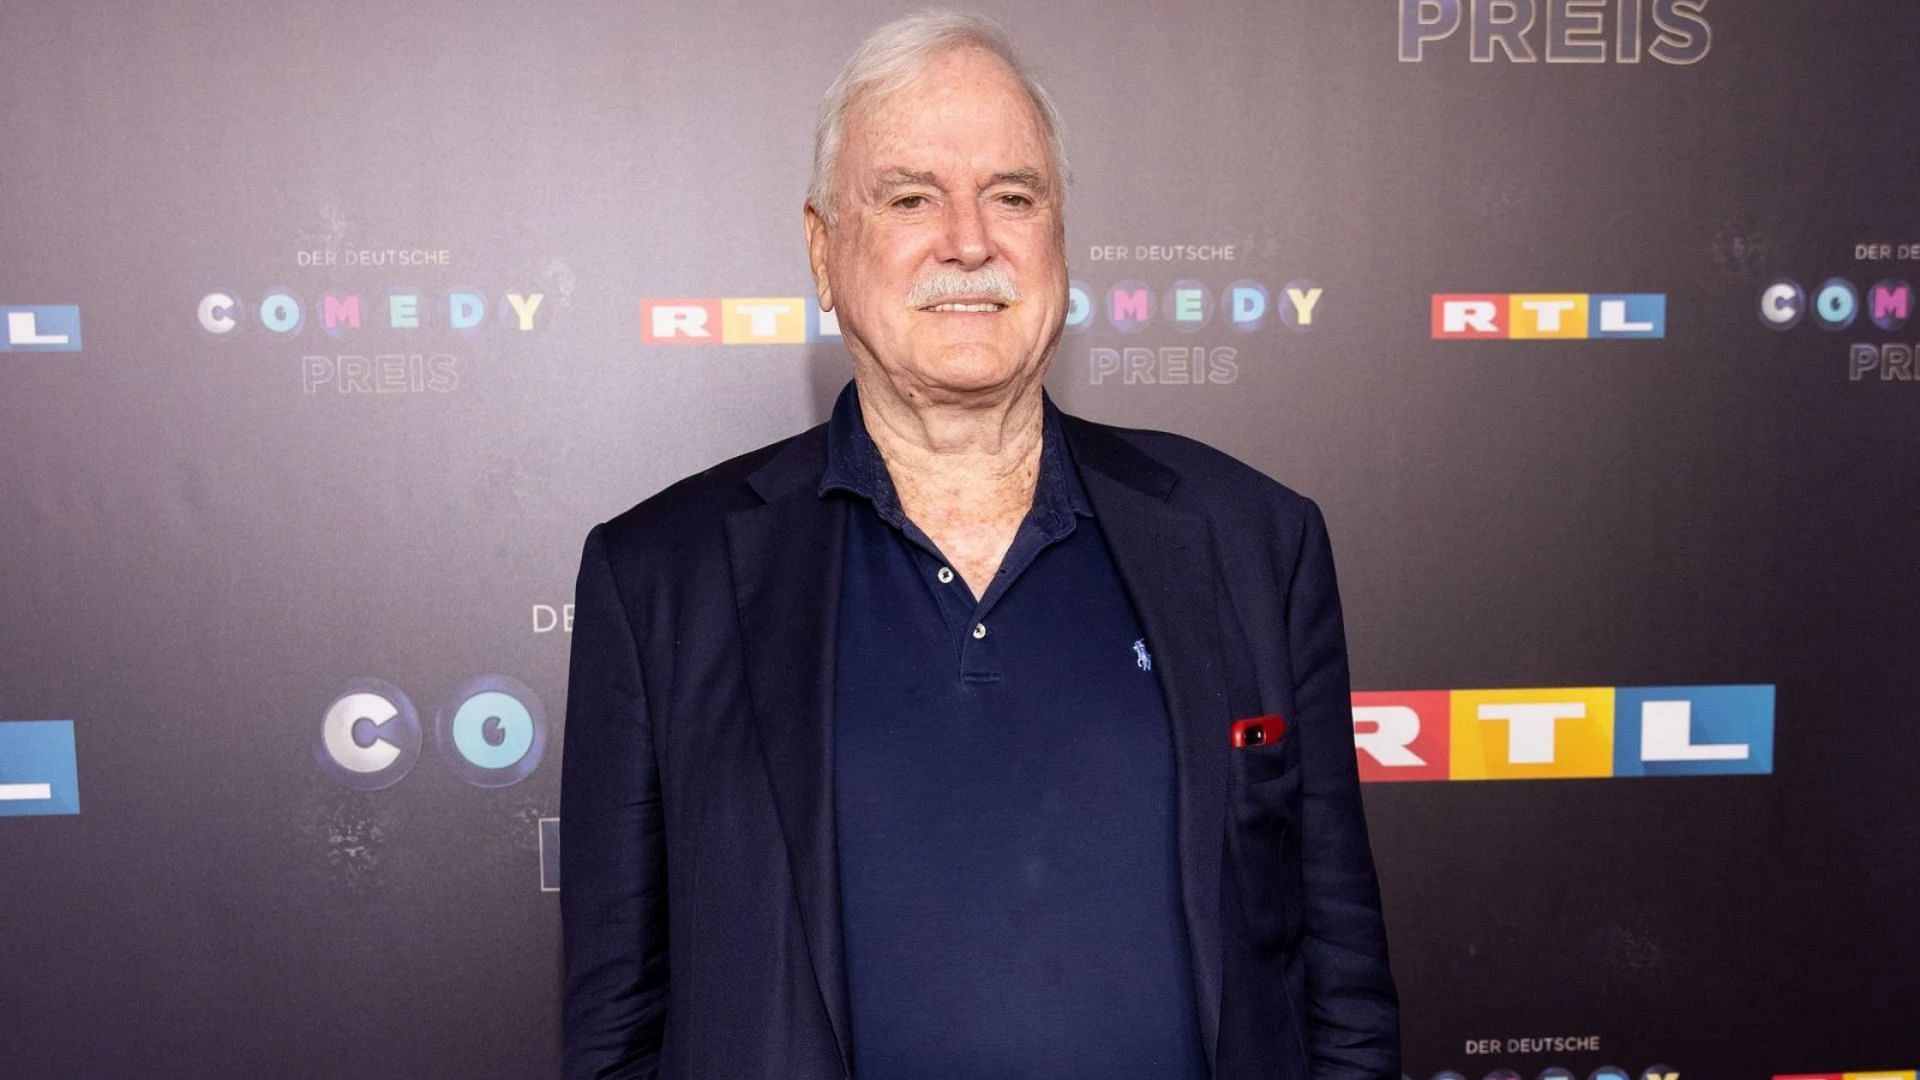 John Cleese opens up about his financial condition (Image via Getty)